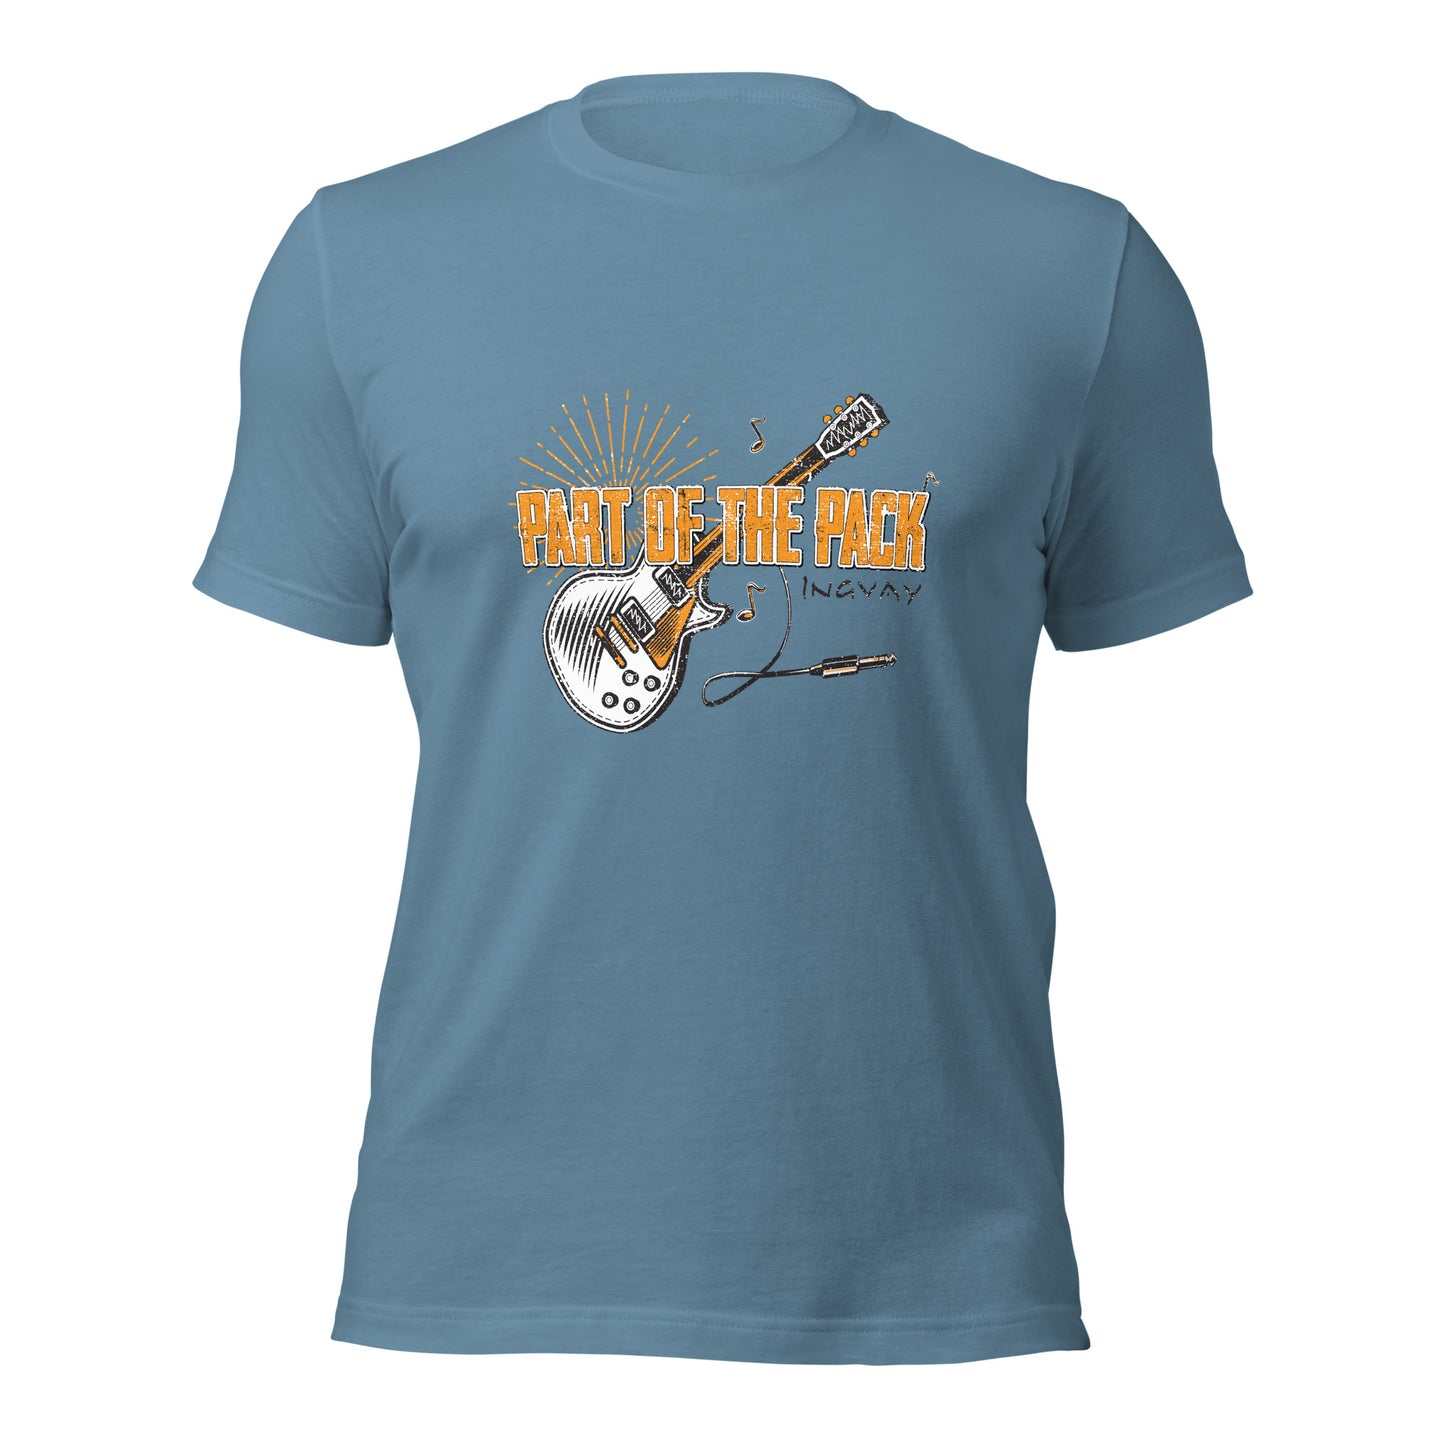 INGVAY "Part Of The Pack" Unisex t-shirt